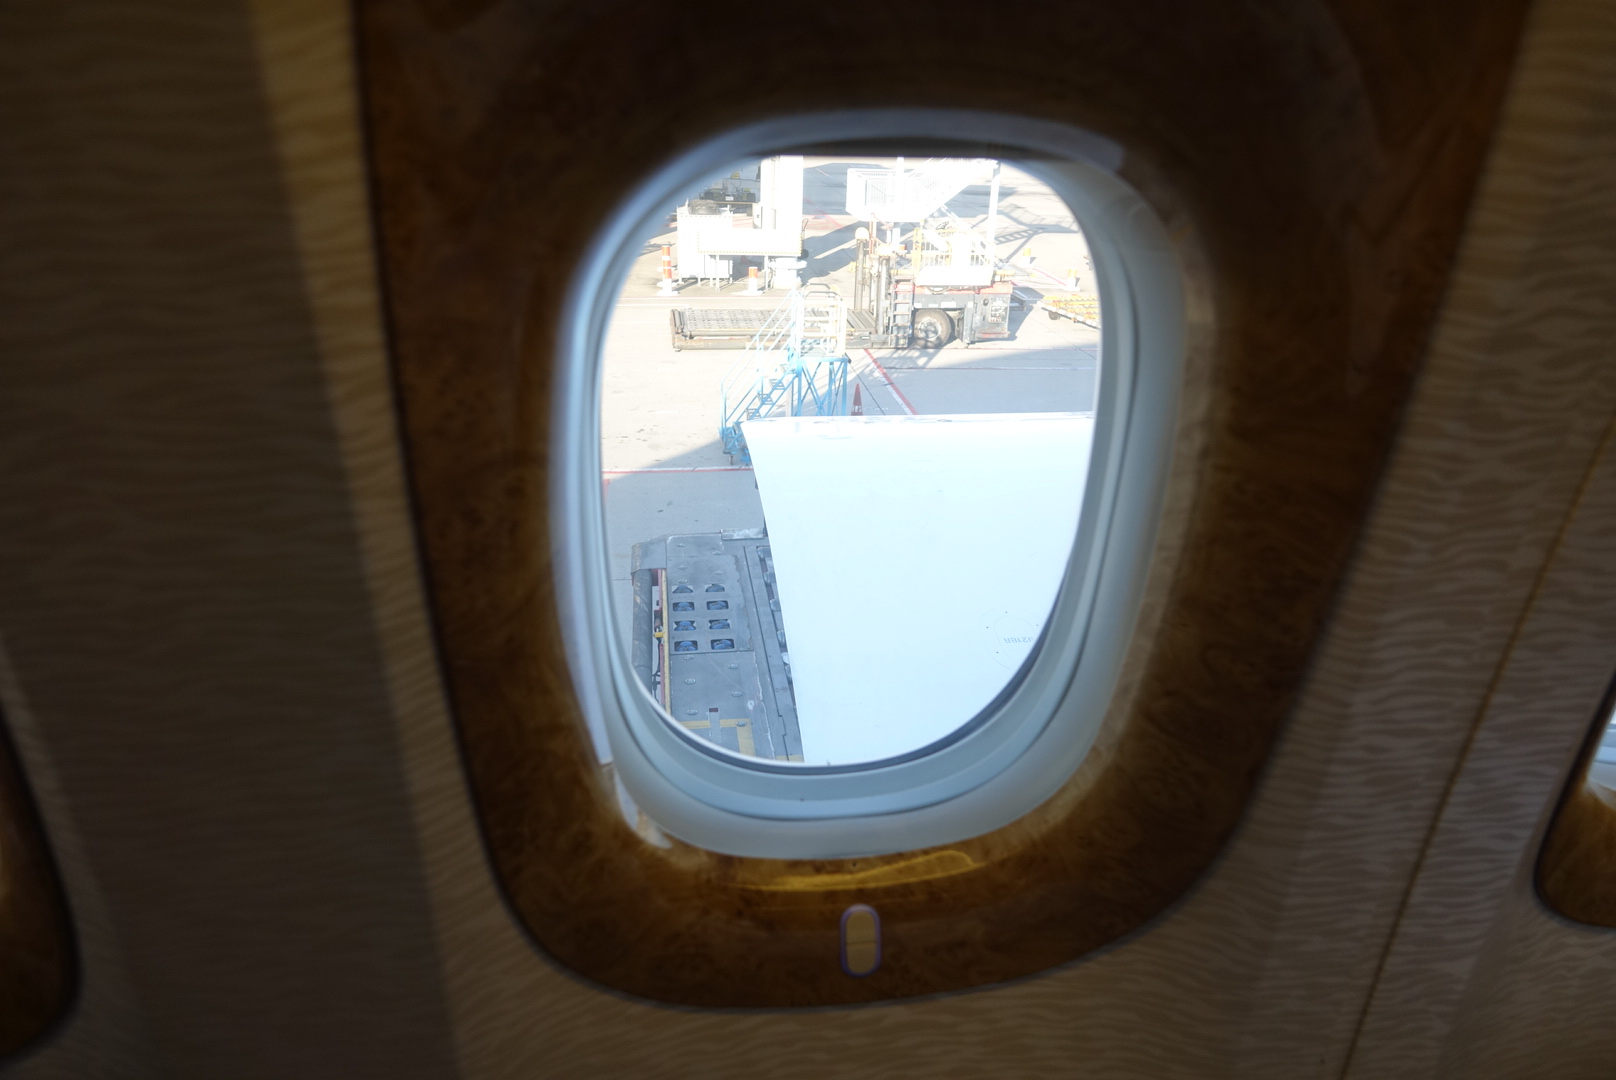 a window of an airplane